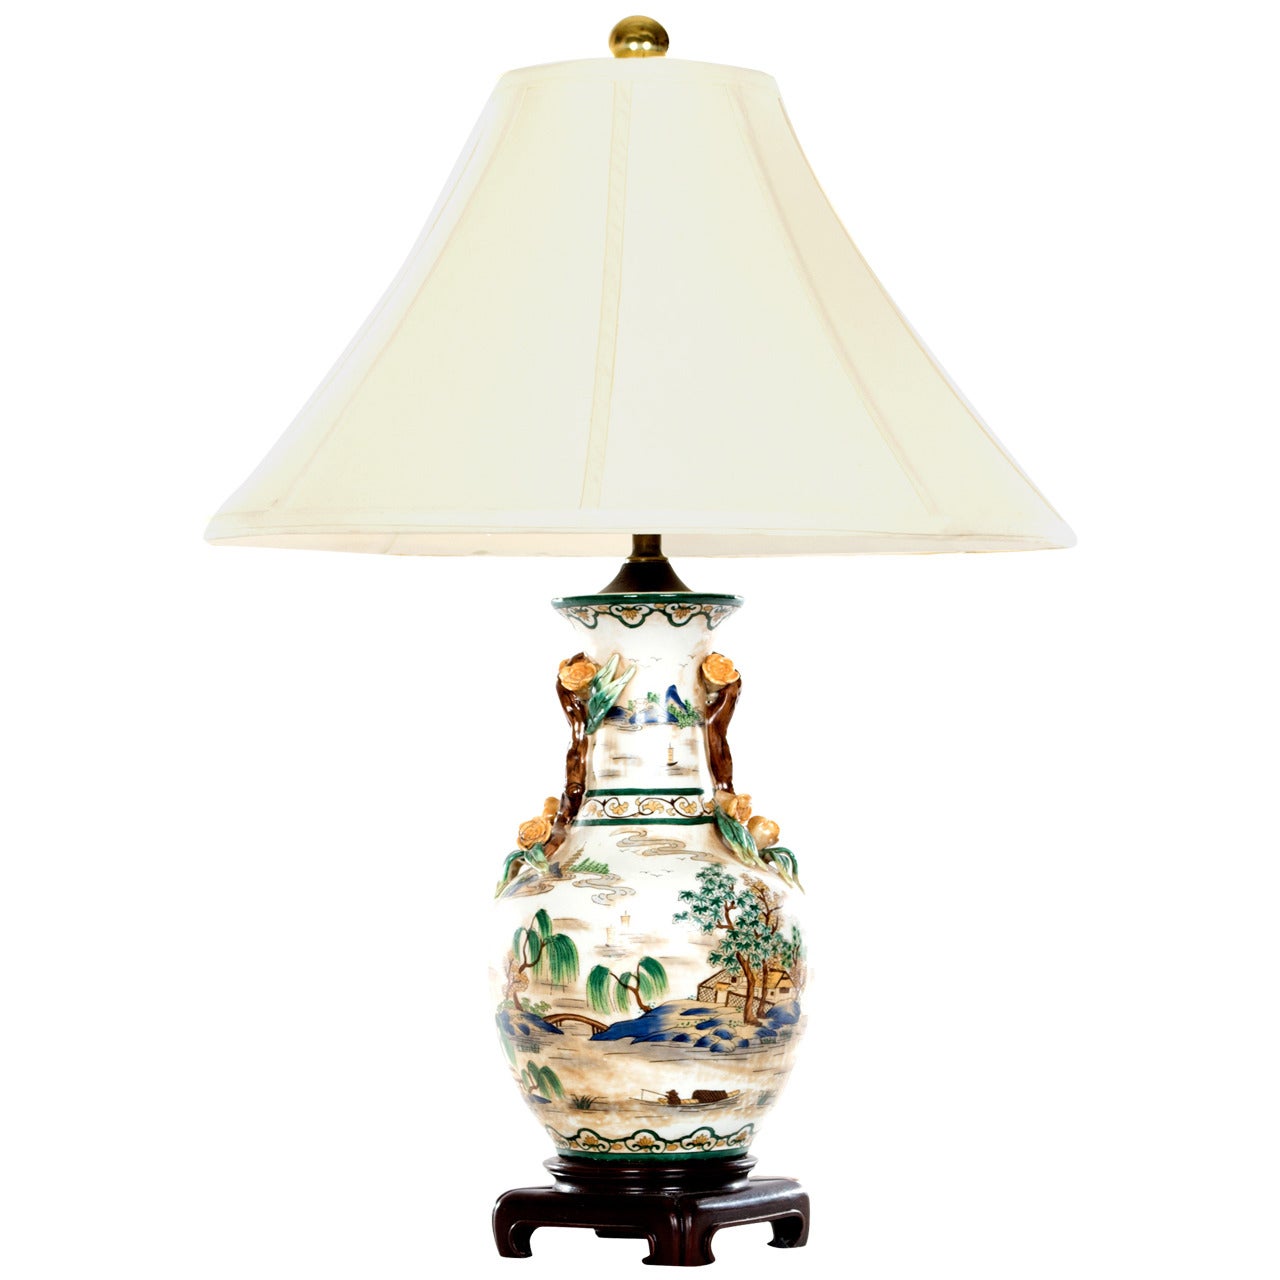 Chinese Baluster Vase as a Lamp with Molded Appliqué Handles